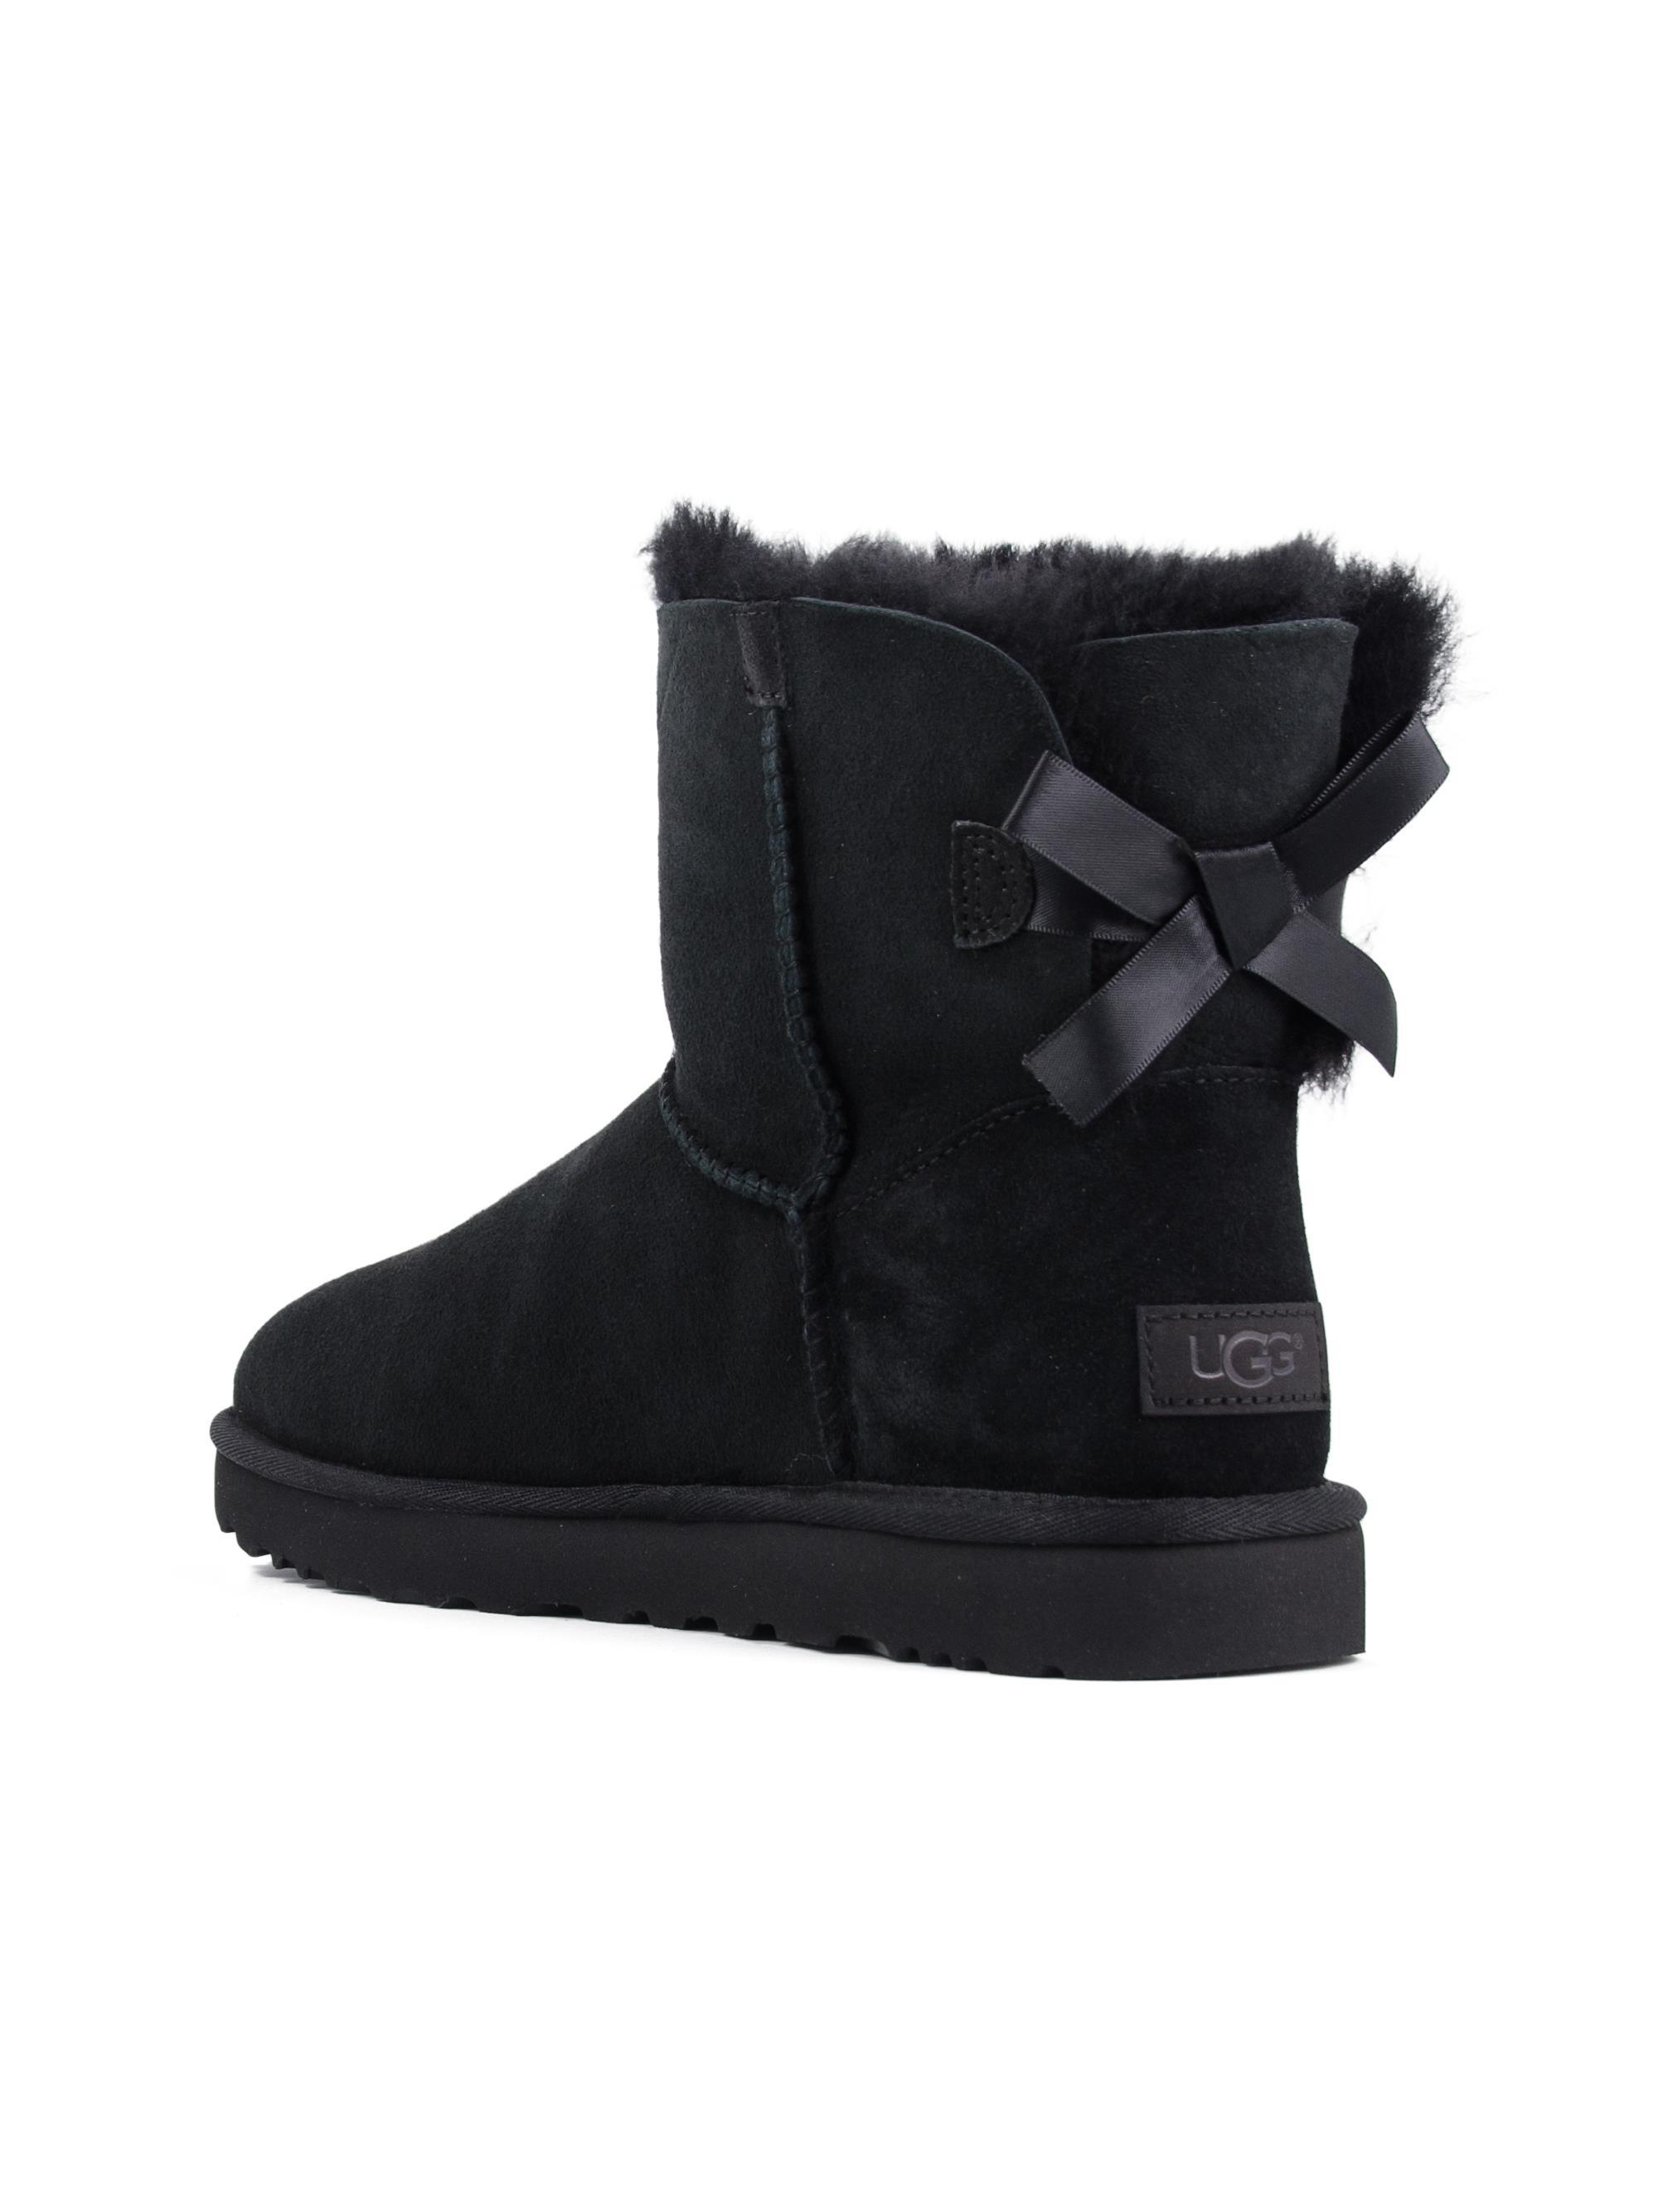 Buy > ugg black boots with bows > in stock